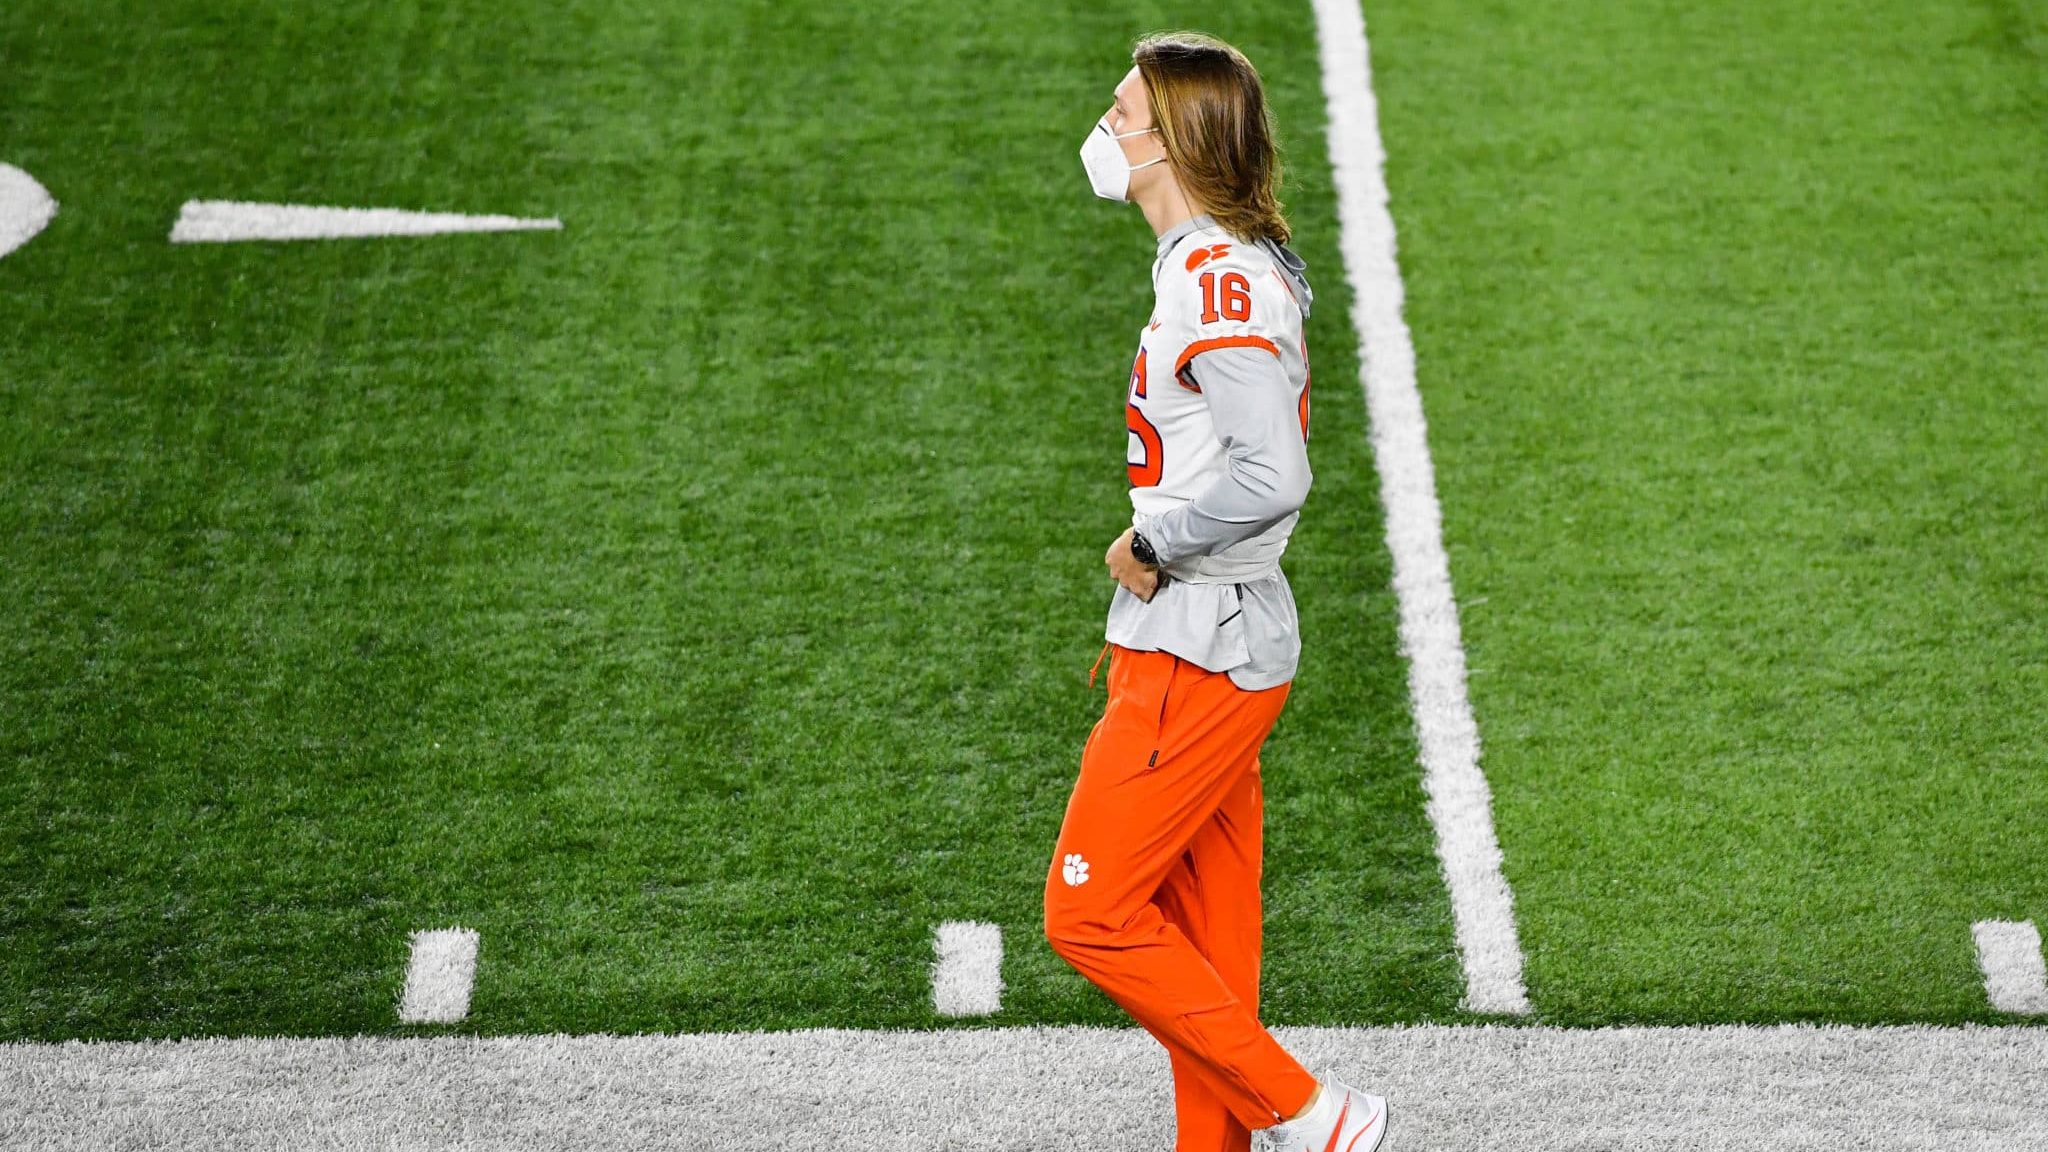 SOUTH BEND, INDIANA - NOVEMBER 07: Quarterback Trevor Lawrence #16 of the Clemson Tigers watches warmups before the game against the Notre Dame Fighting Irish at Notre Dame Stadium on November 7, 2020 in South Bend, Indiana.